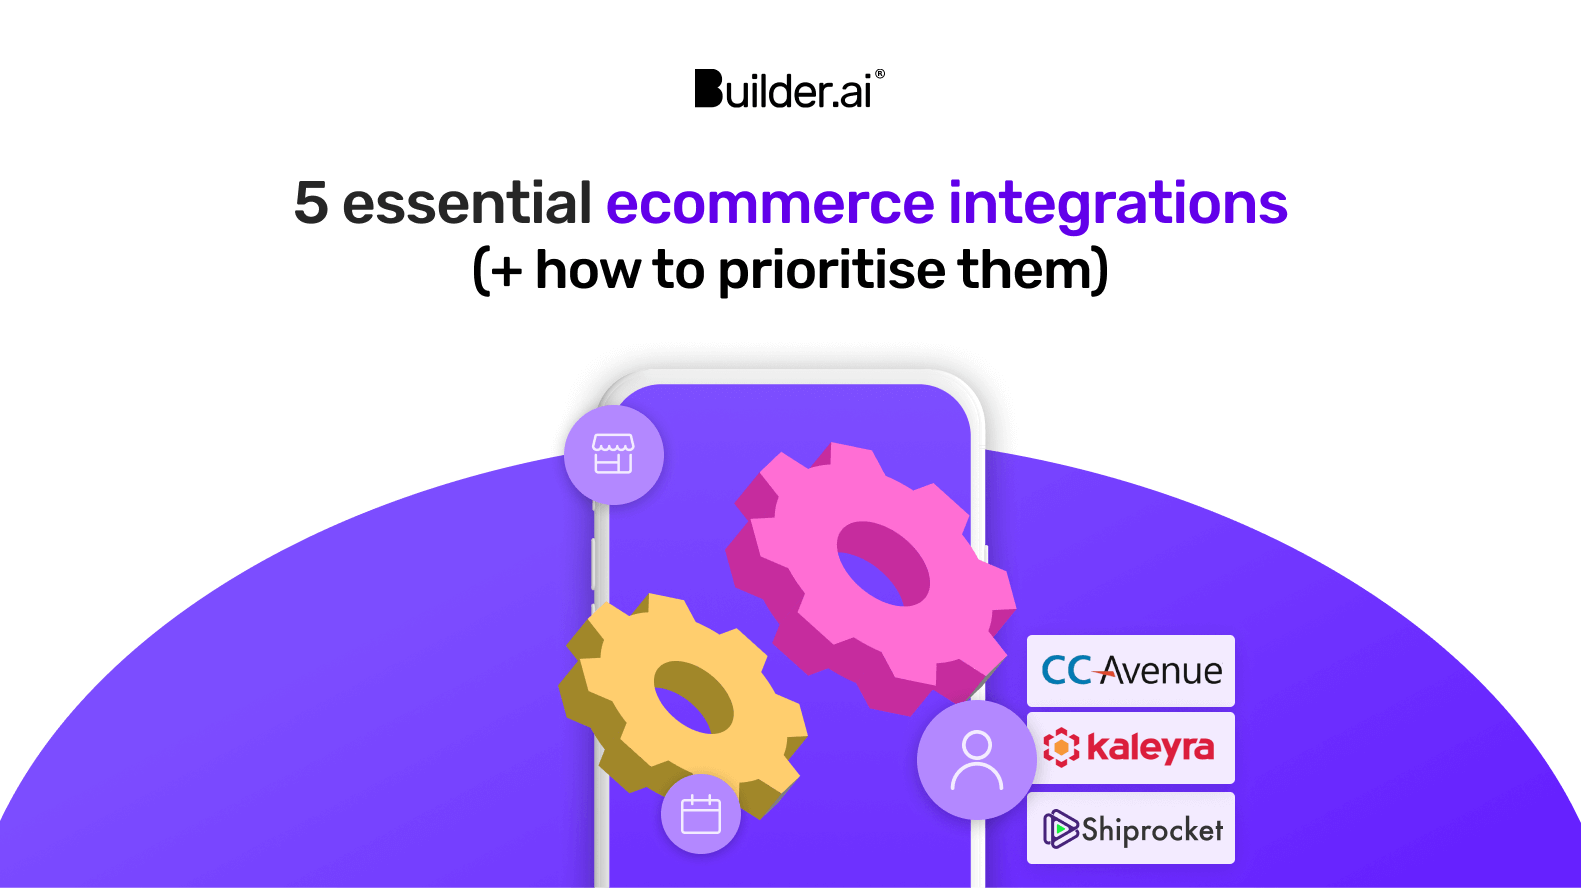 5 essential ecommerce integrations (+ how to prioritise them)